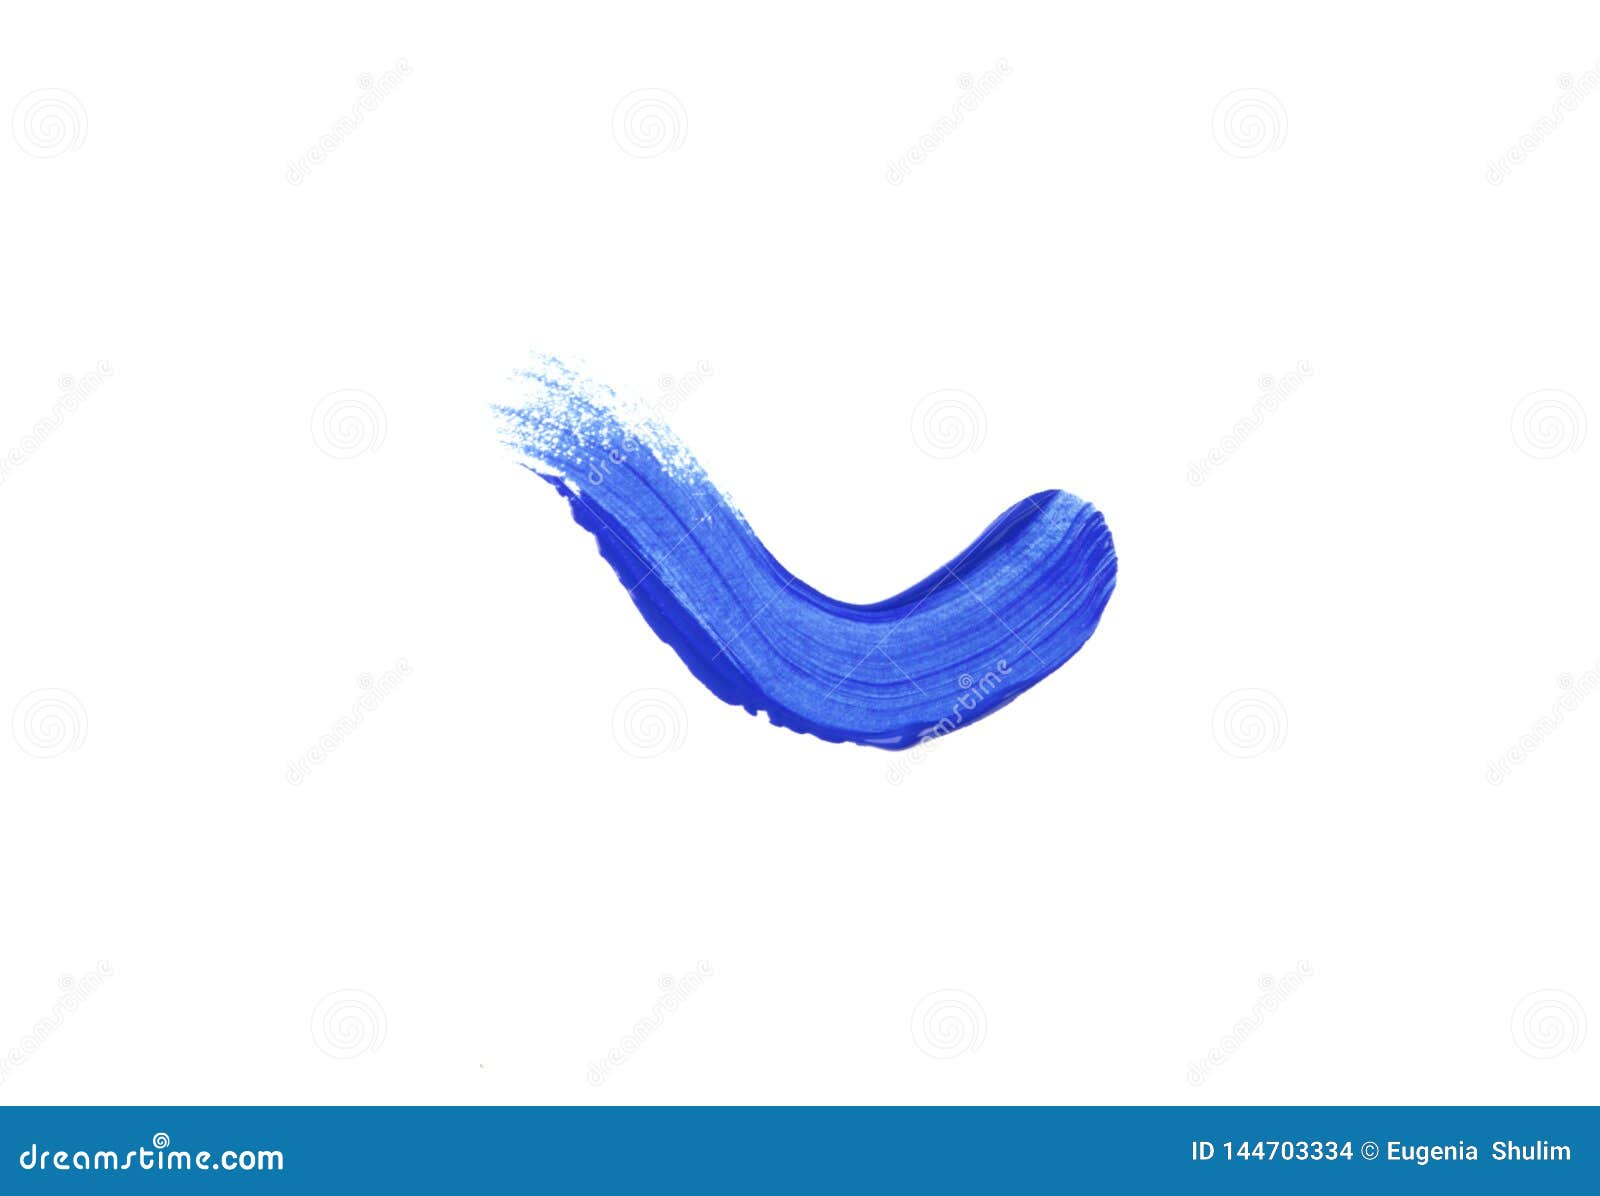 A Beautiful Smear of Blue Paint on a White Background Stock Photo ...